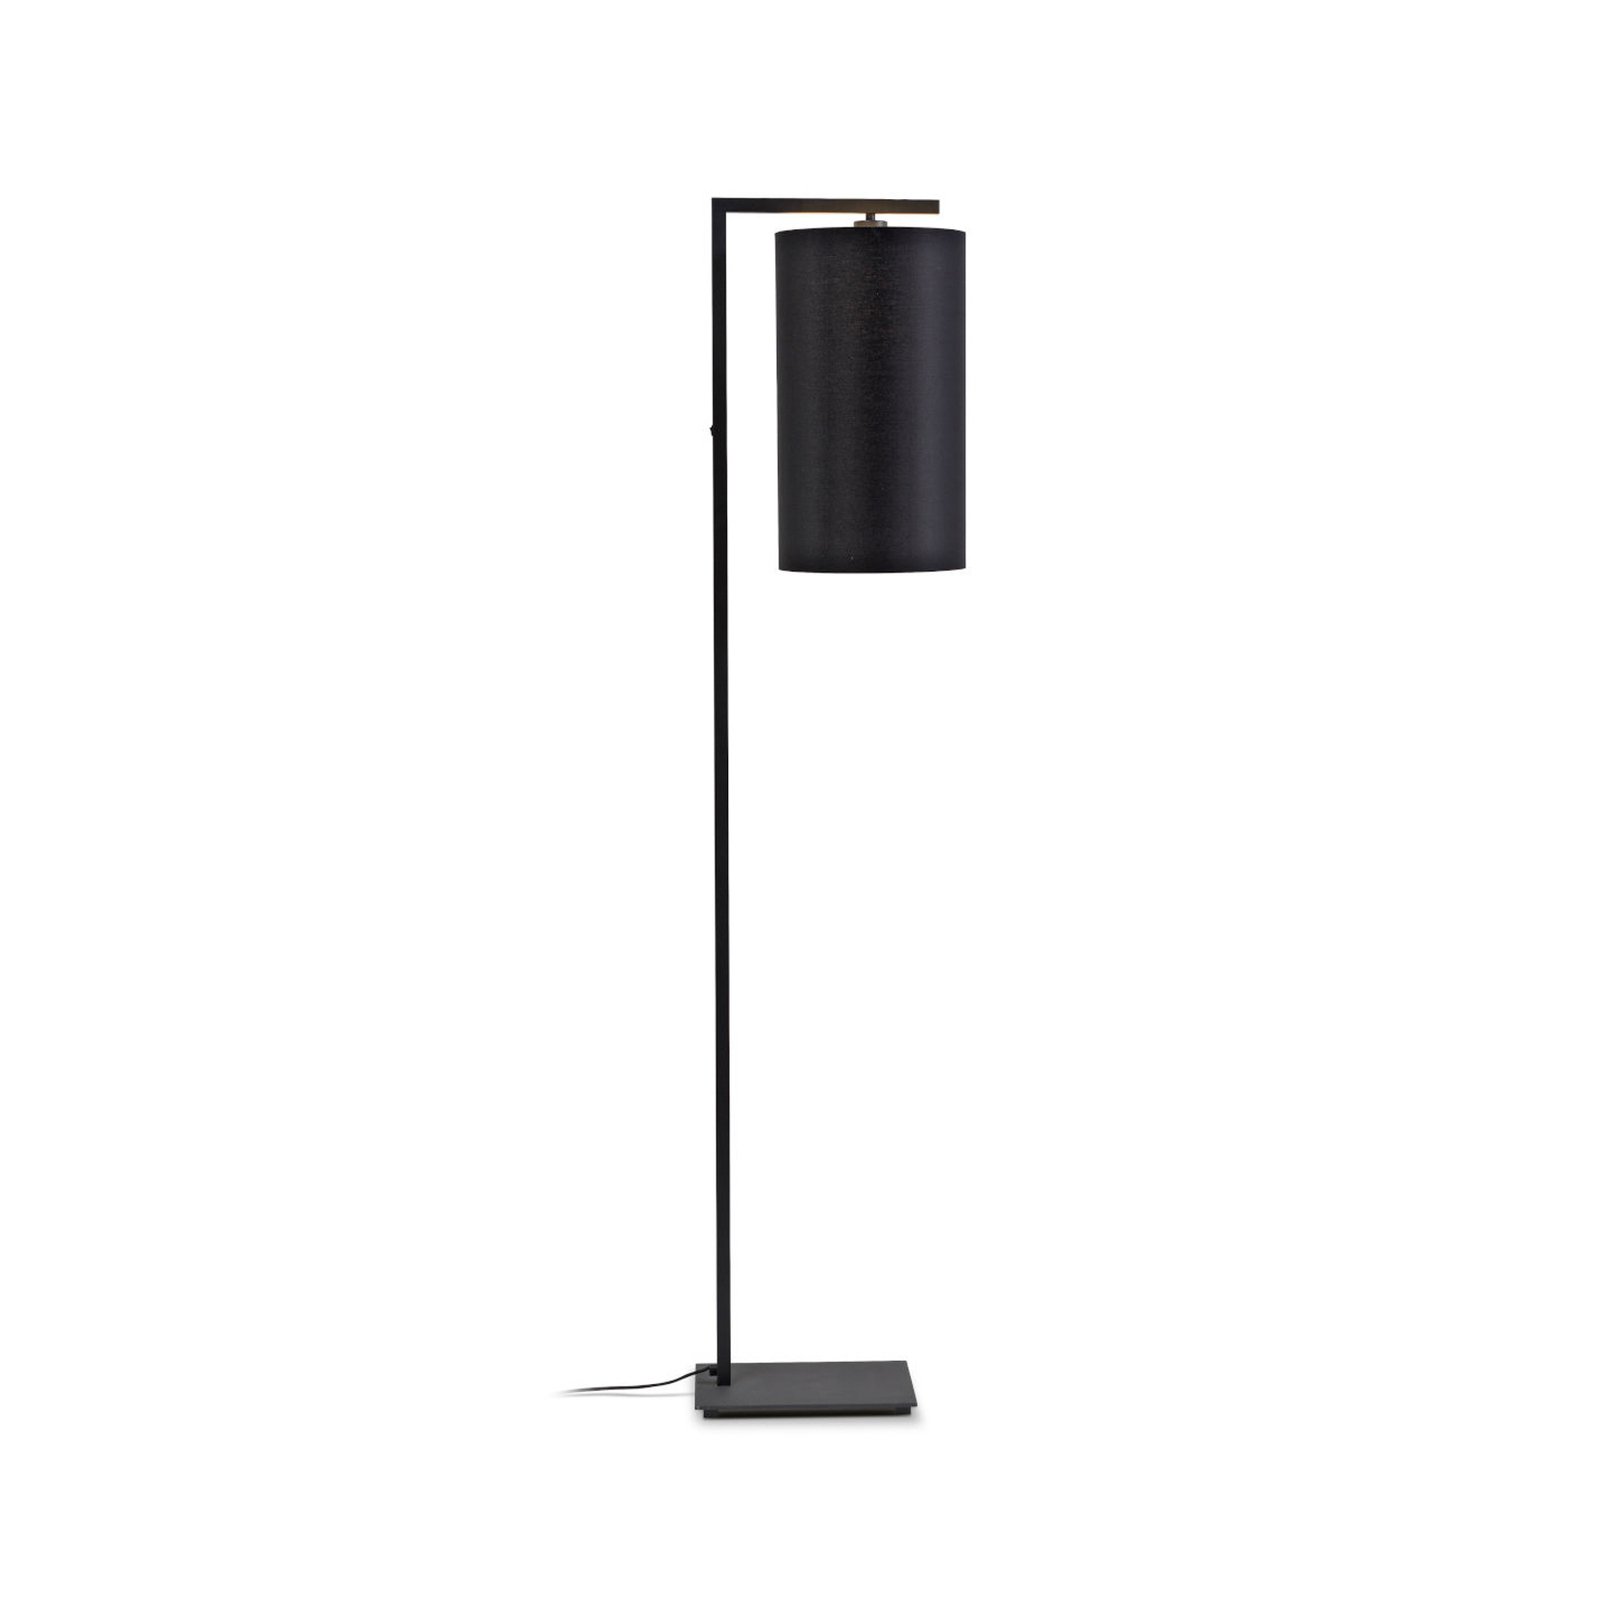 It’s about RoMi Boston, lampshade long, black